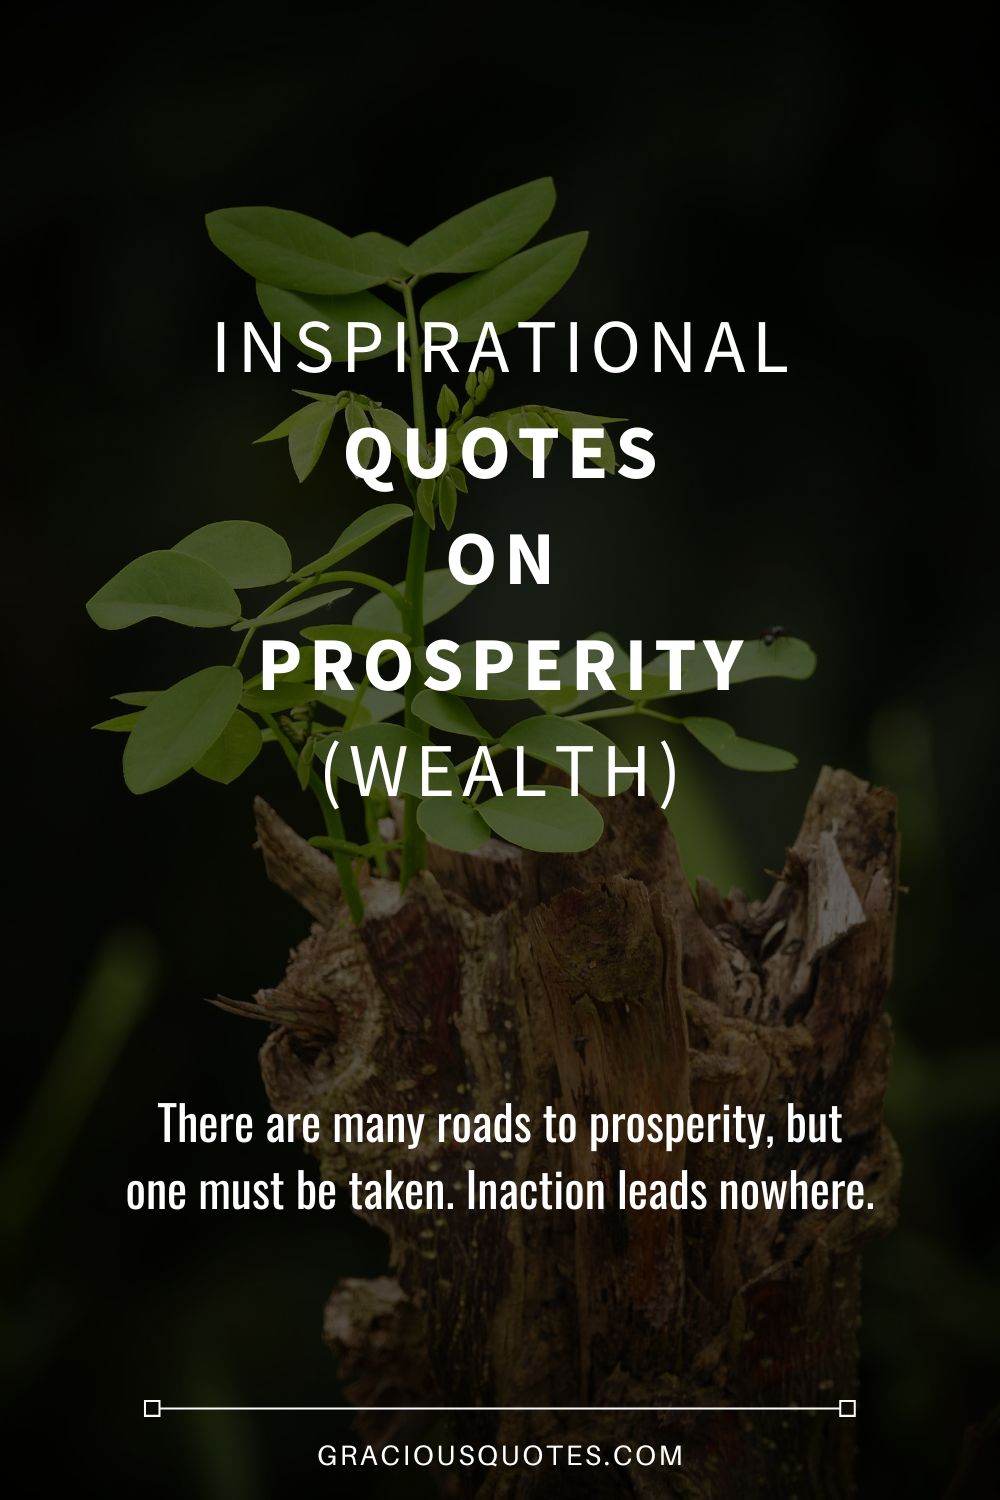 Inspirational Quotes on Prosperity (WEALTH) - Gracious Quotes